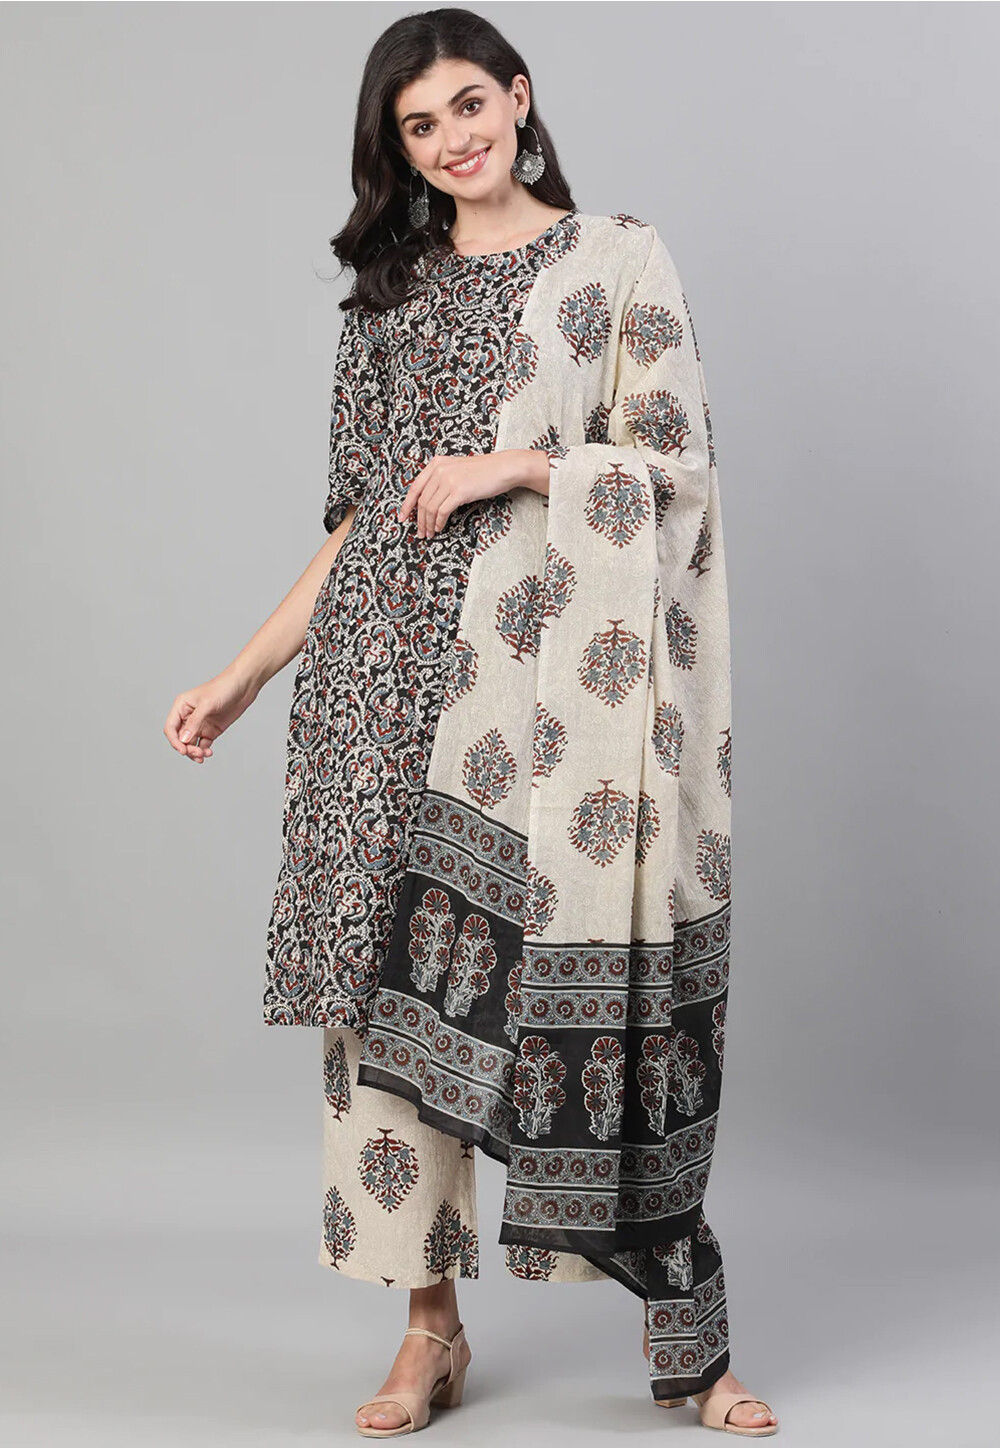 update your style with this #kalamkari #kurta for a casual day out | Шитье